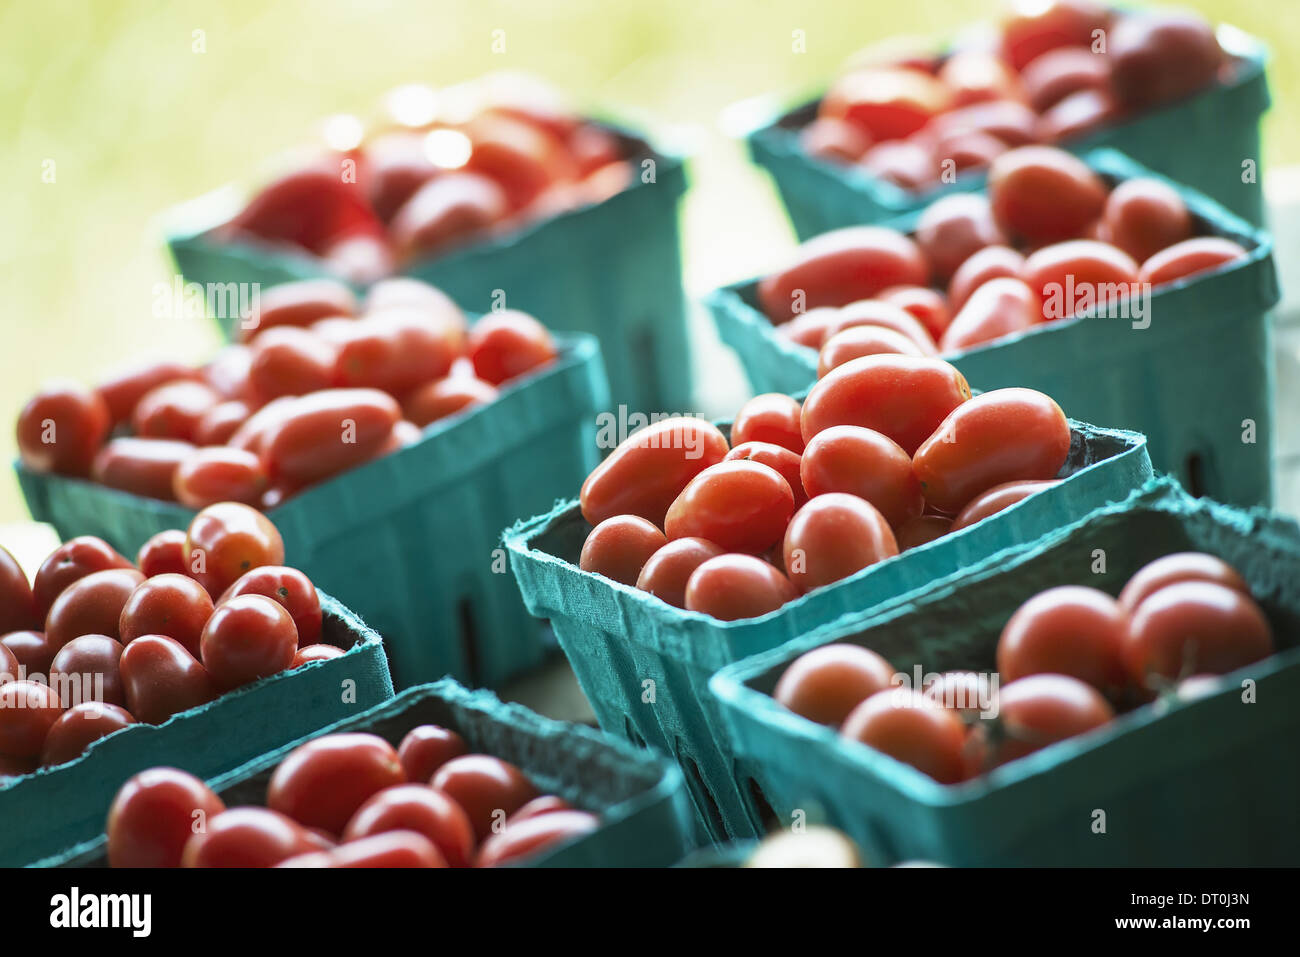 Woodstock New York USA Organic red cherry tomatoes in boxes market stall Stock Photo